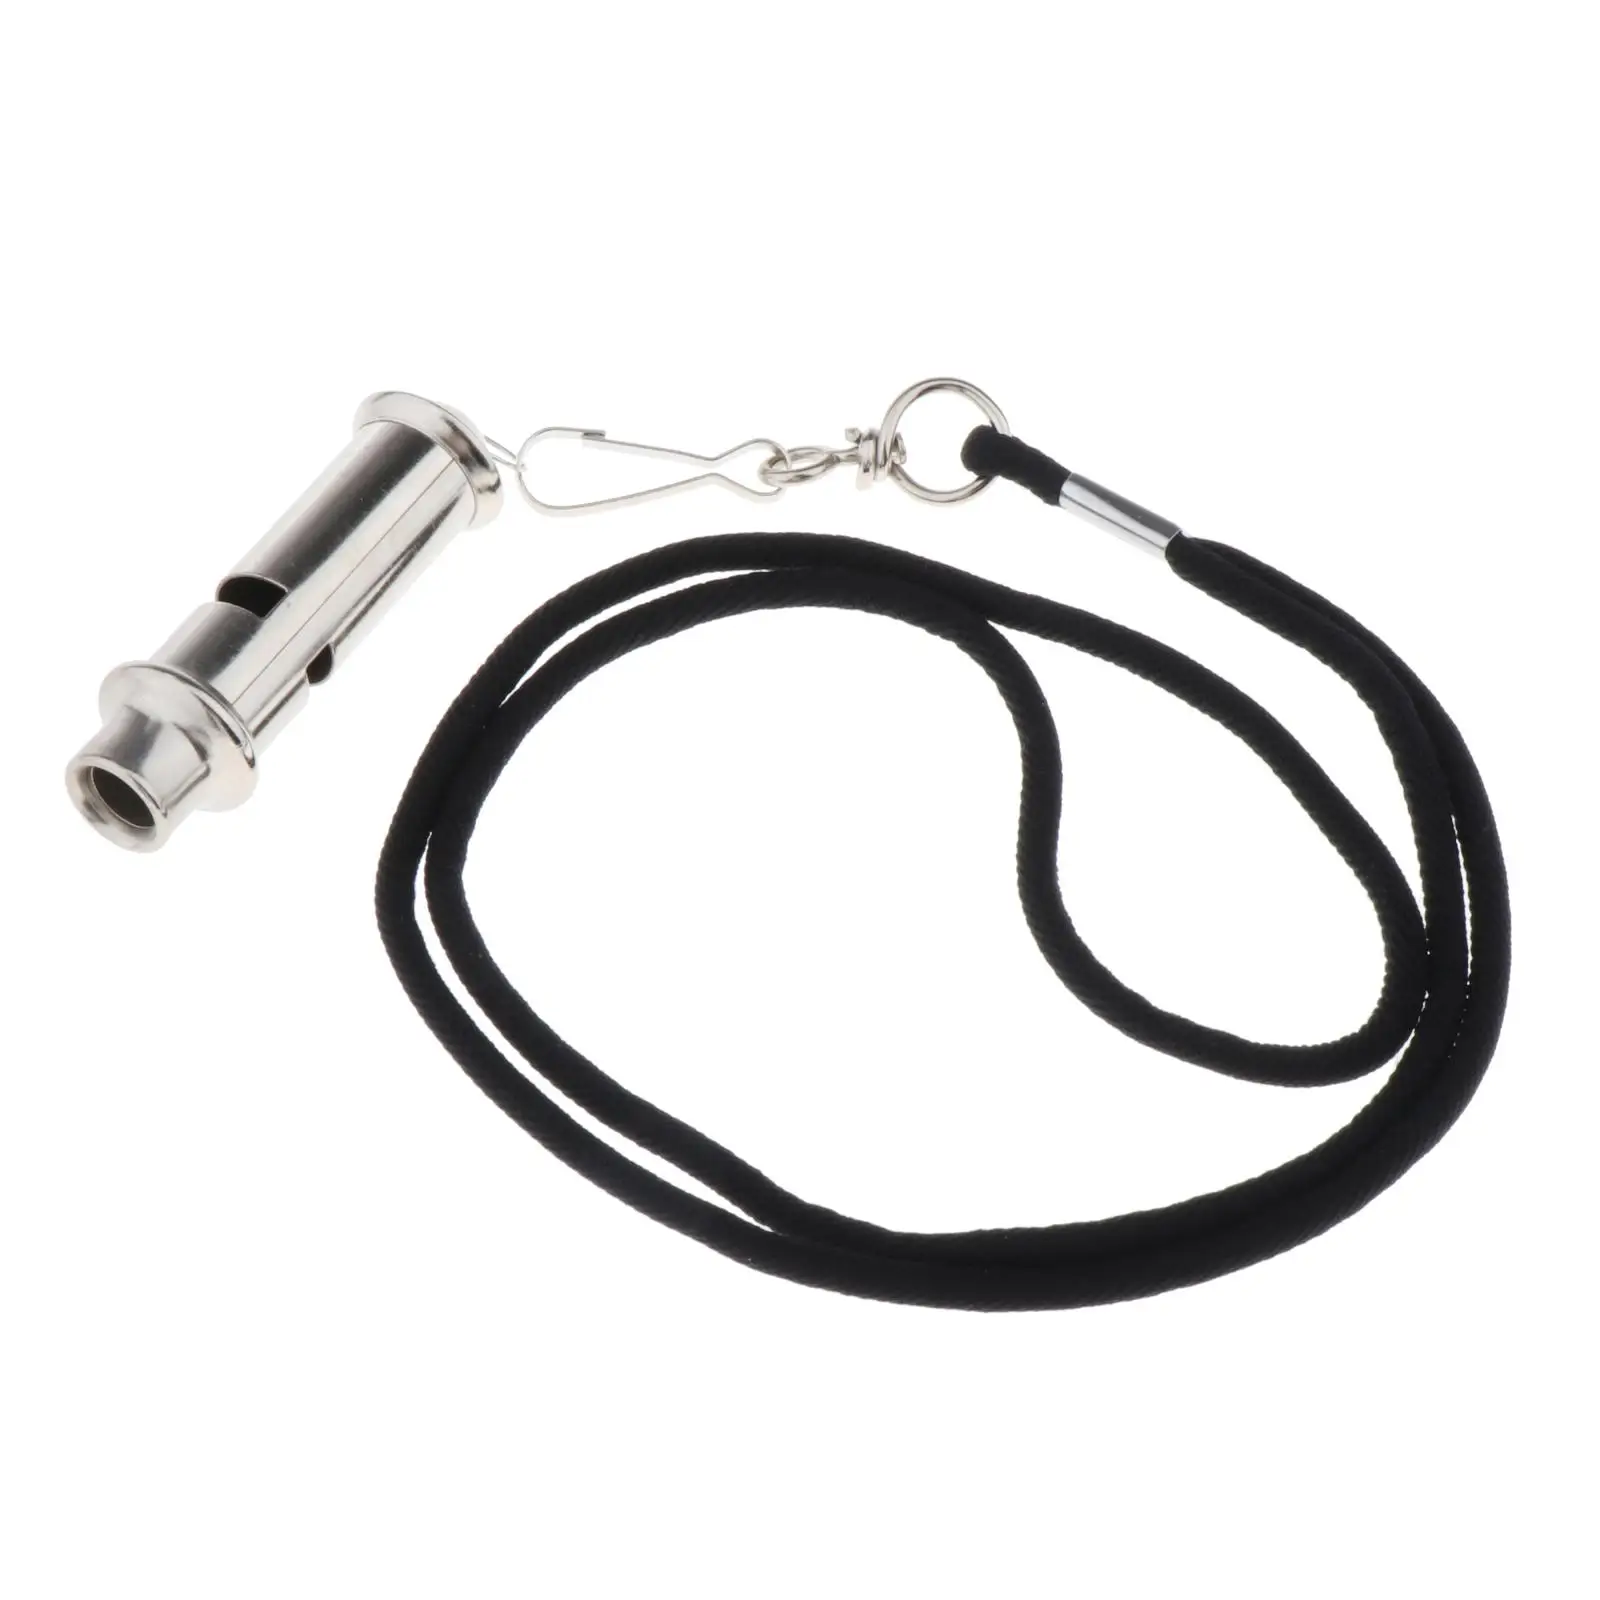 Metal Referee Whistle Emergency Survival Hiking Camping Whistle with Neck String